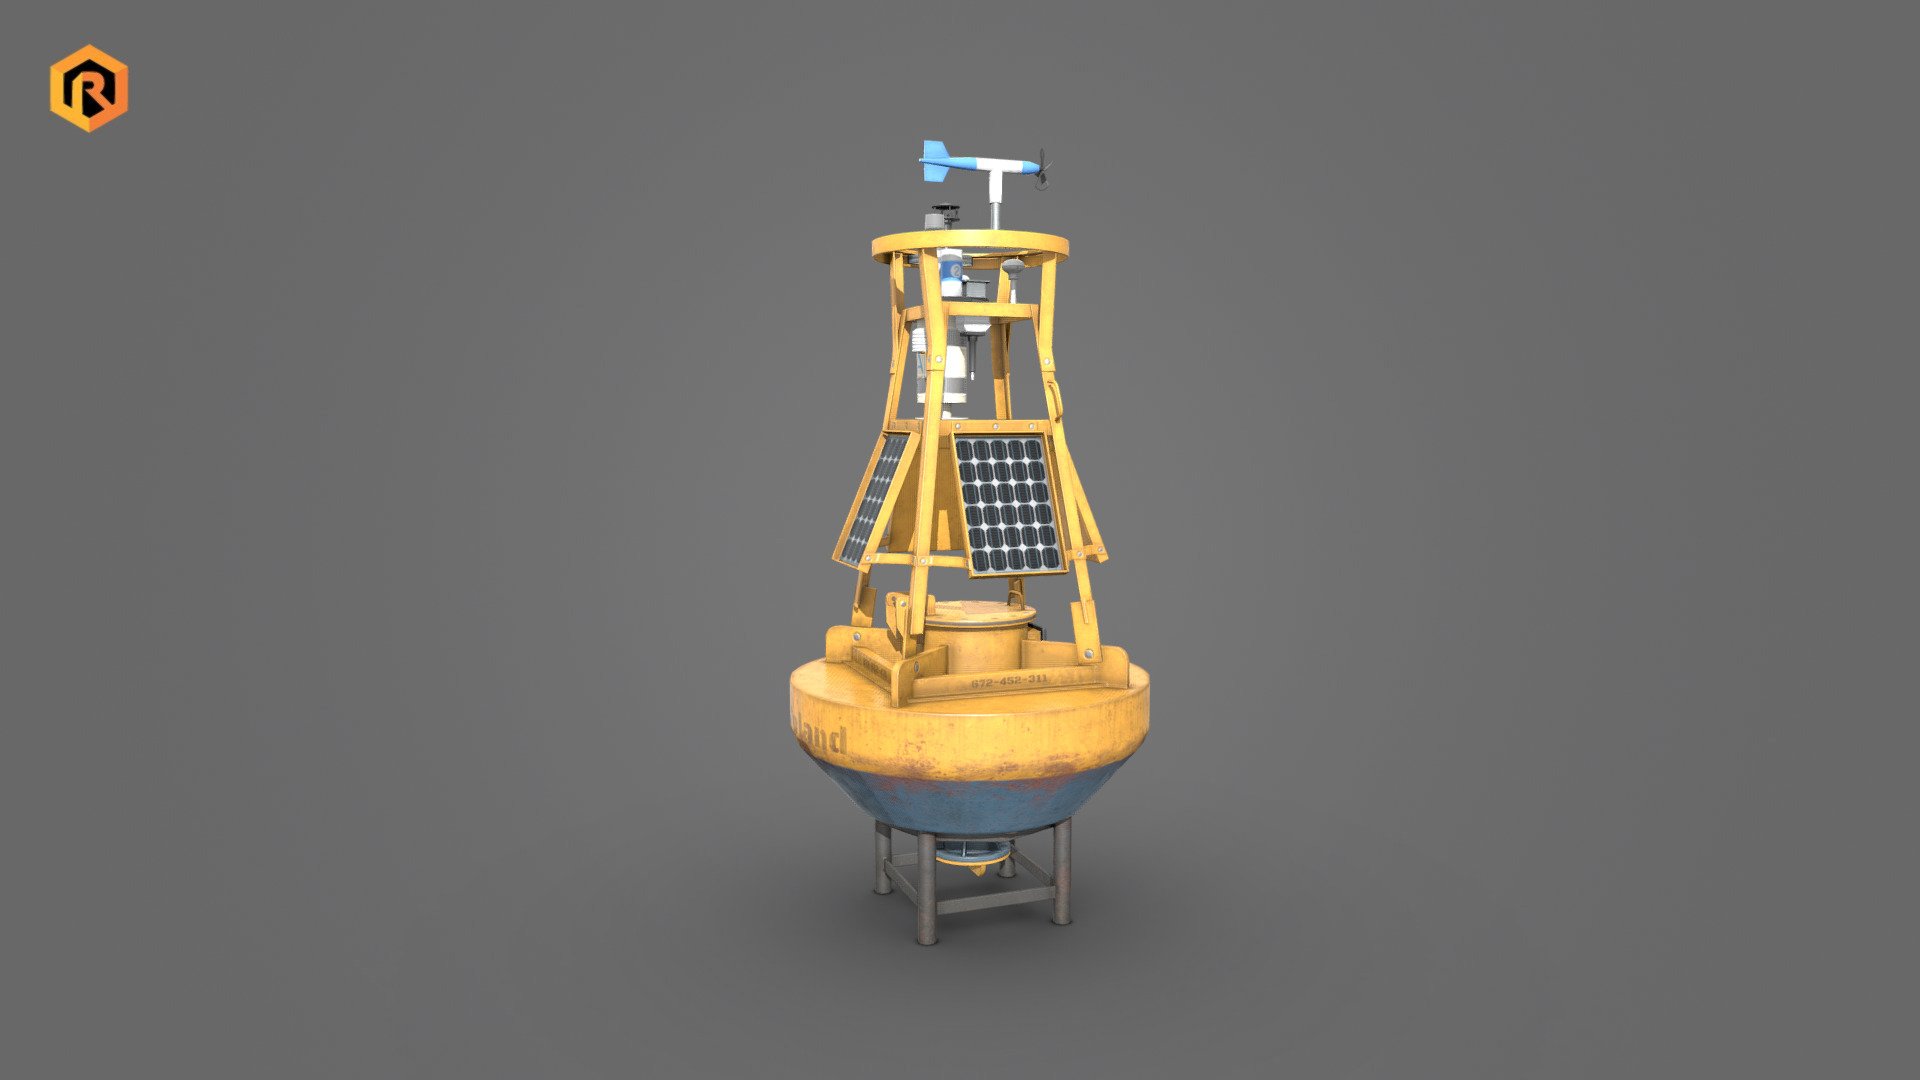 Low-poly PBR 3D model of Weather Buoy.

This object is best for use in games and other real-time applications such as Unity or Unreal Engine. 

It can also be rendered in Blender (ex Cycles) or Vray as the model is equipped with all required textures. 

We have made every effort to ensure that the model and textures are as detailed as possible and made with the greatest care.  We hope it worked out ;)

Technical details:   


4096 PBR Texture Set (Albedo, Metallic, Smoothness, Normal, AO)  
4478 Triangles  
5058  Vertices
Model is one mesh
Model completely unwrapped
Pivot points are correctly placed
Model scaled to approximate real world size  
All nodes, materials and textures are appropriately named
Lot of additional file formats included (Blender, Unity, UE4,  etc.)

More file formats are available in additional zip file on product page !  

Please feel free to contact me if you have any questions or need any support for this asset 3d model